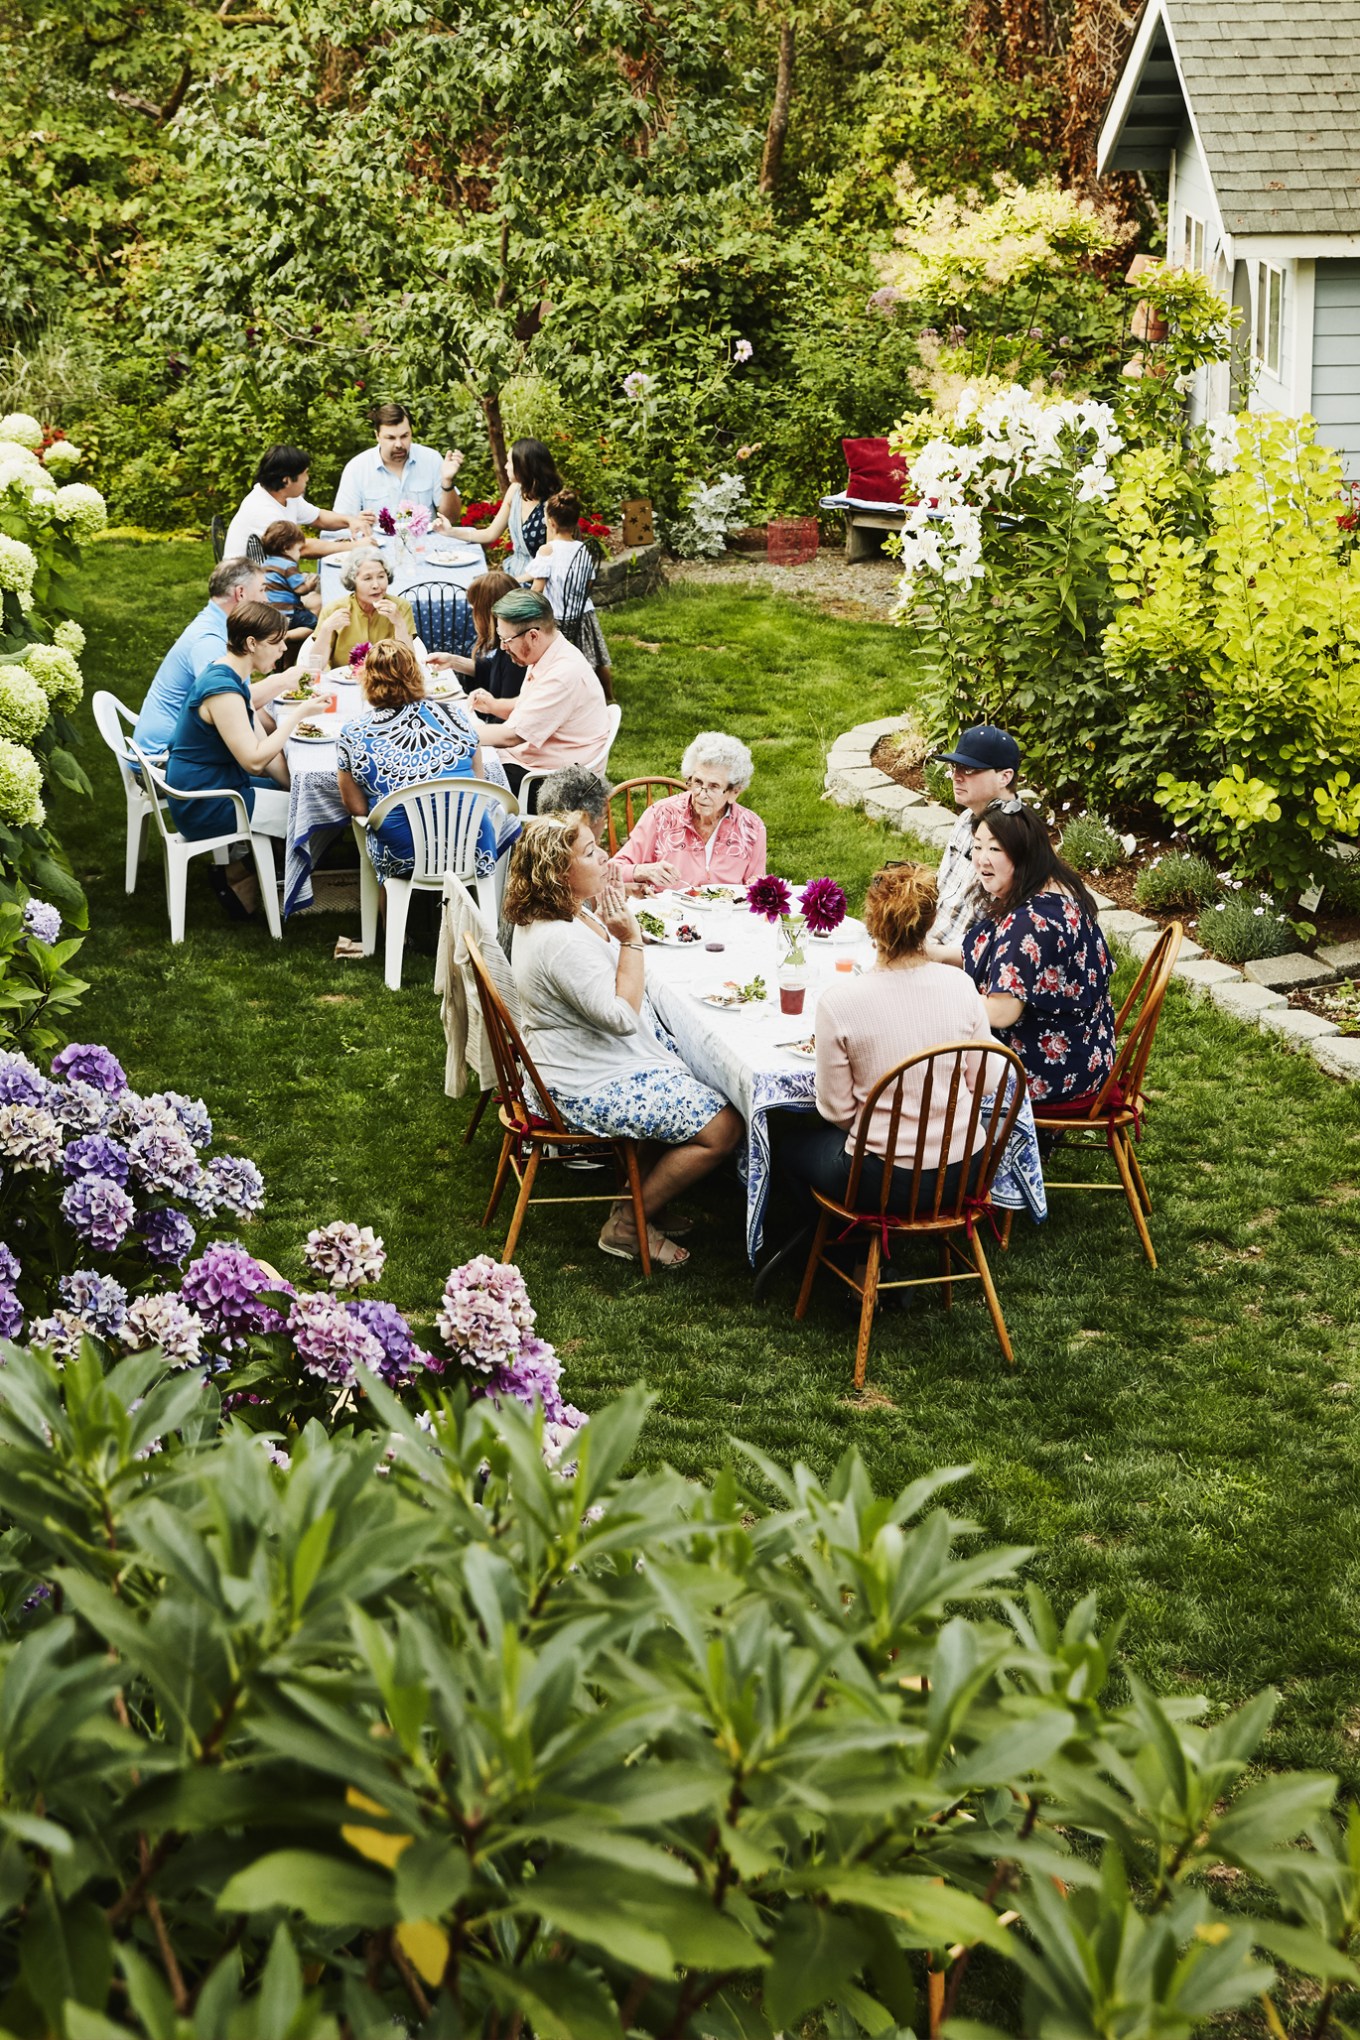 Families gathered at two tables enjoying time in backyard